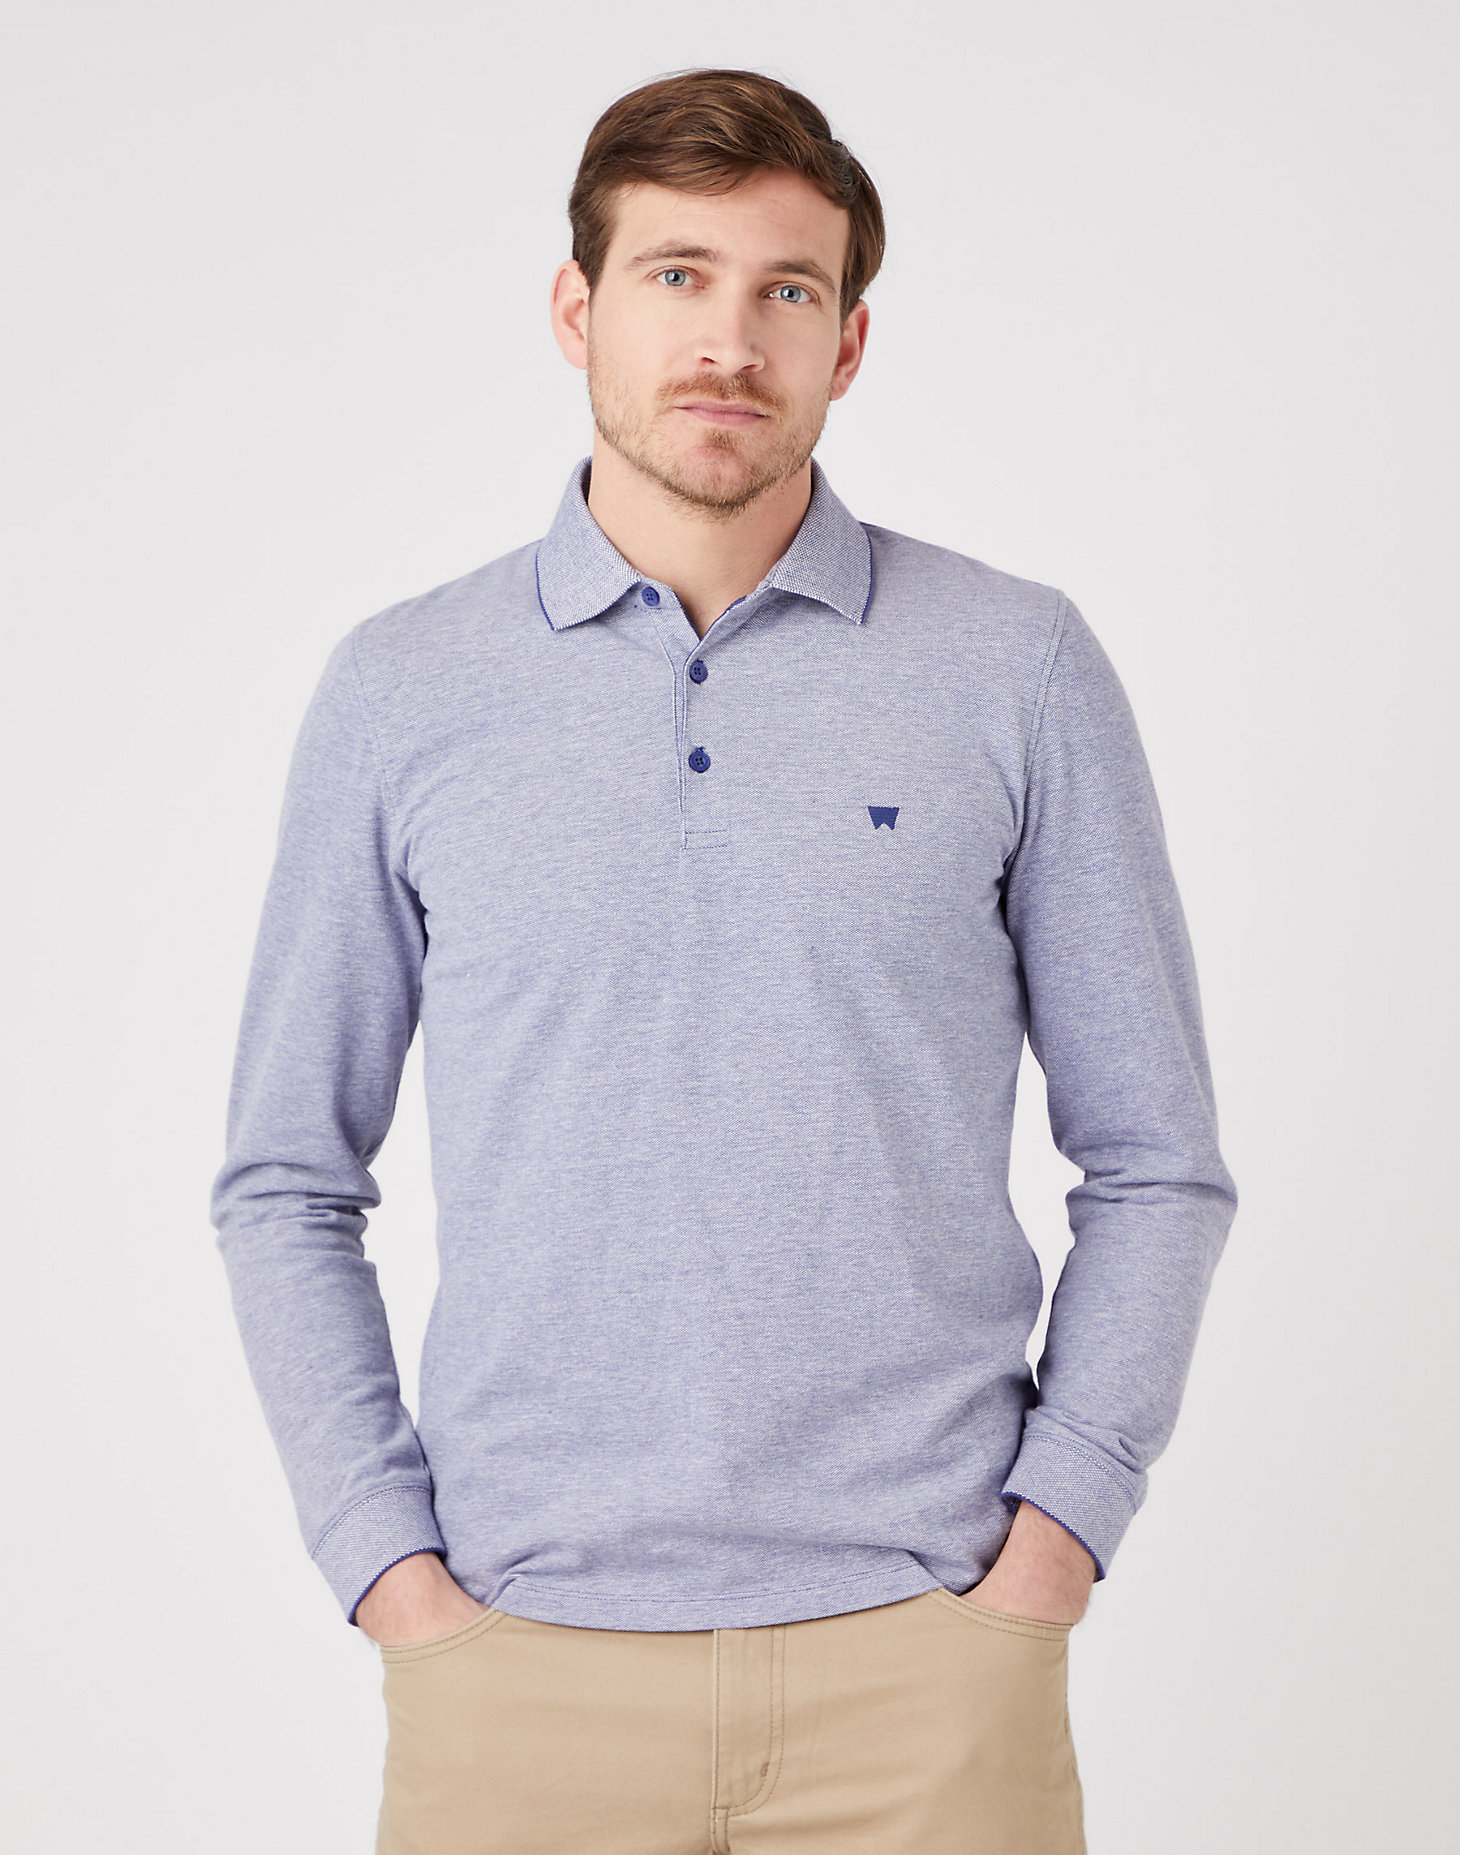 Long Sleeve Refined Polo in Blue Ribbon main view